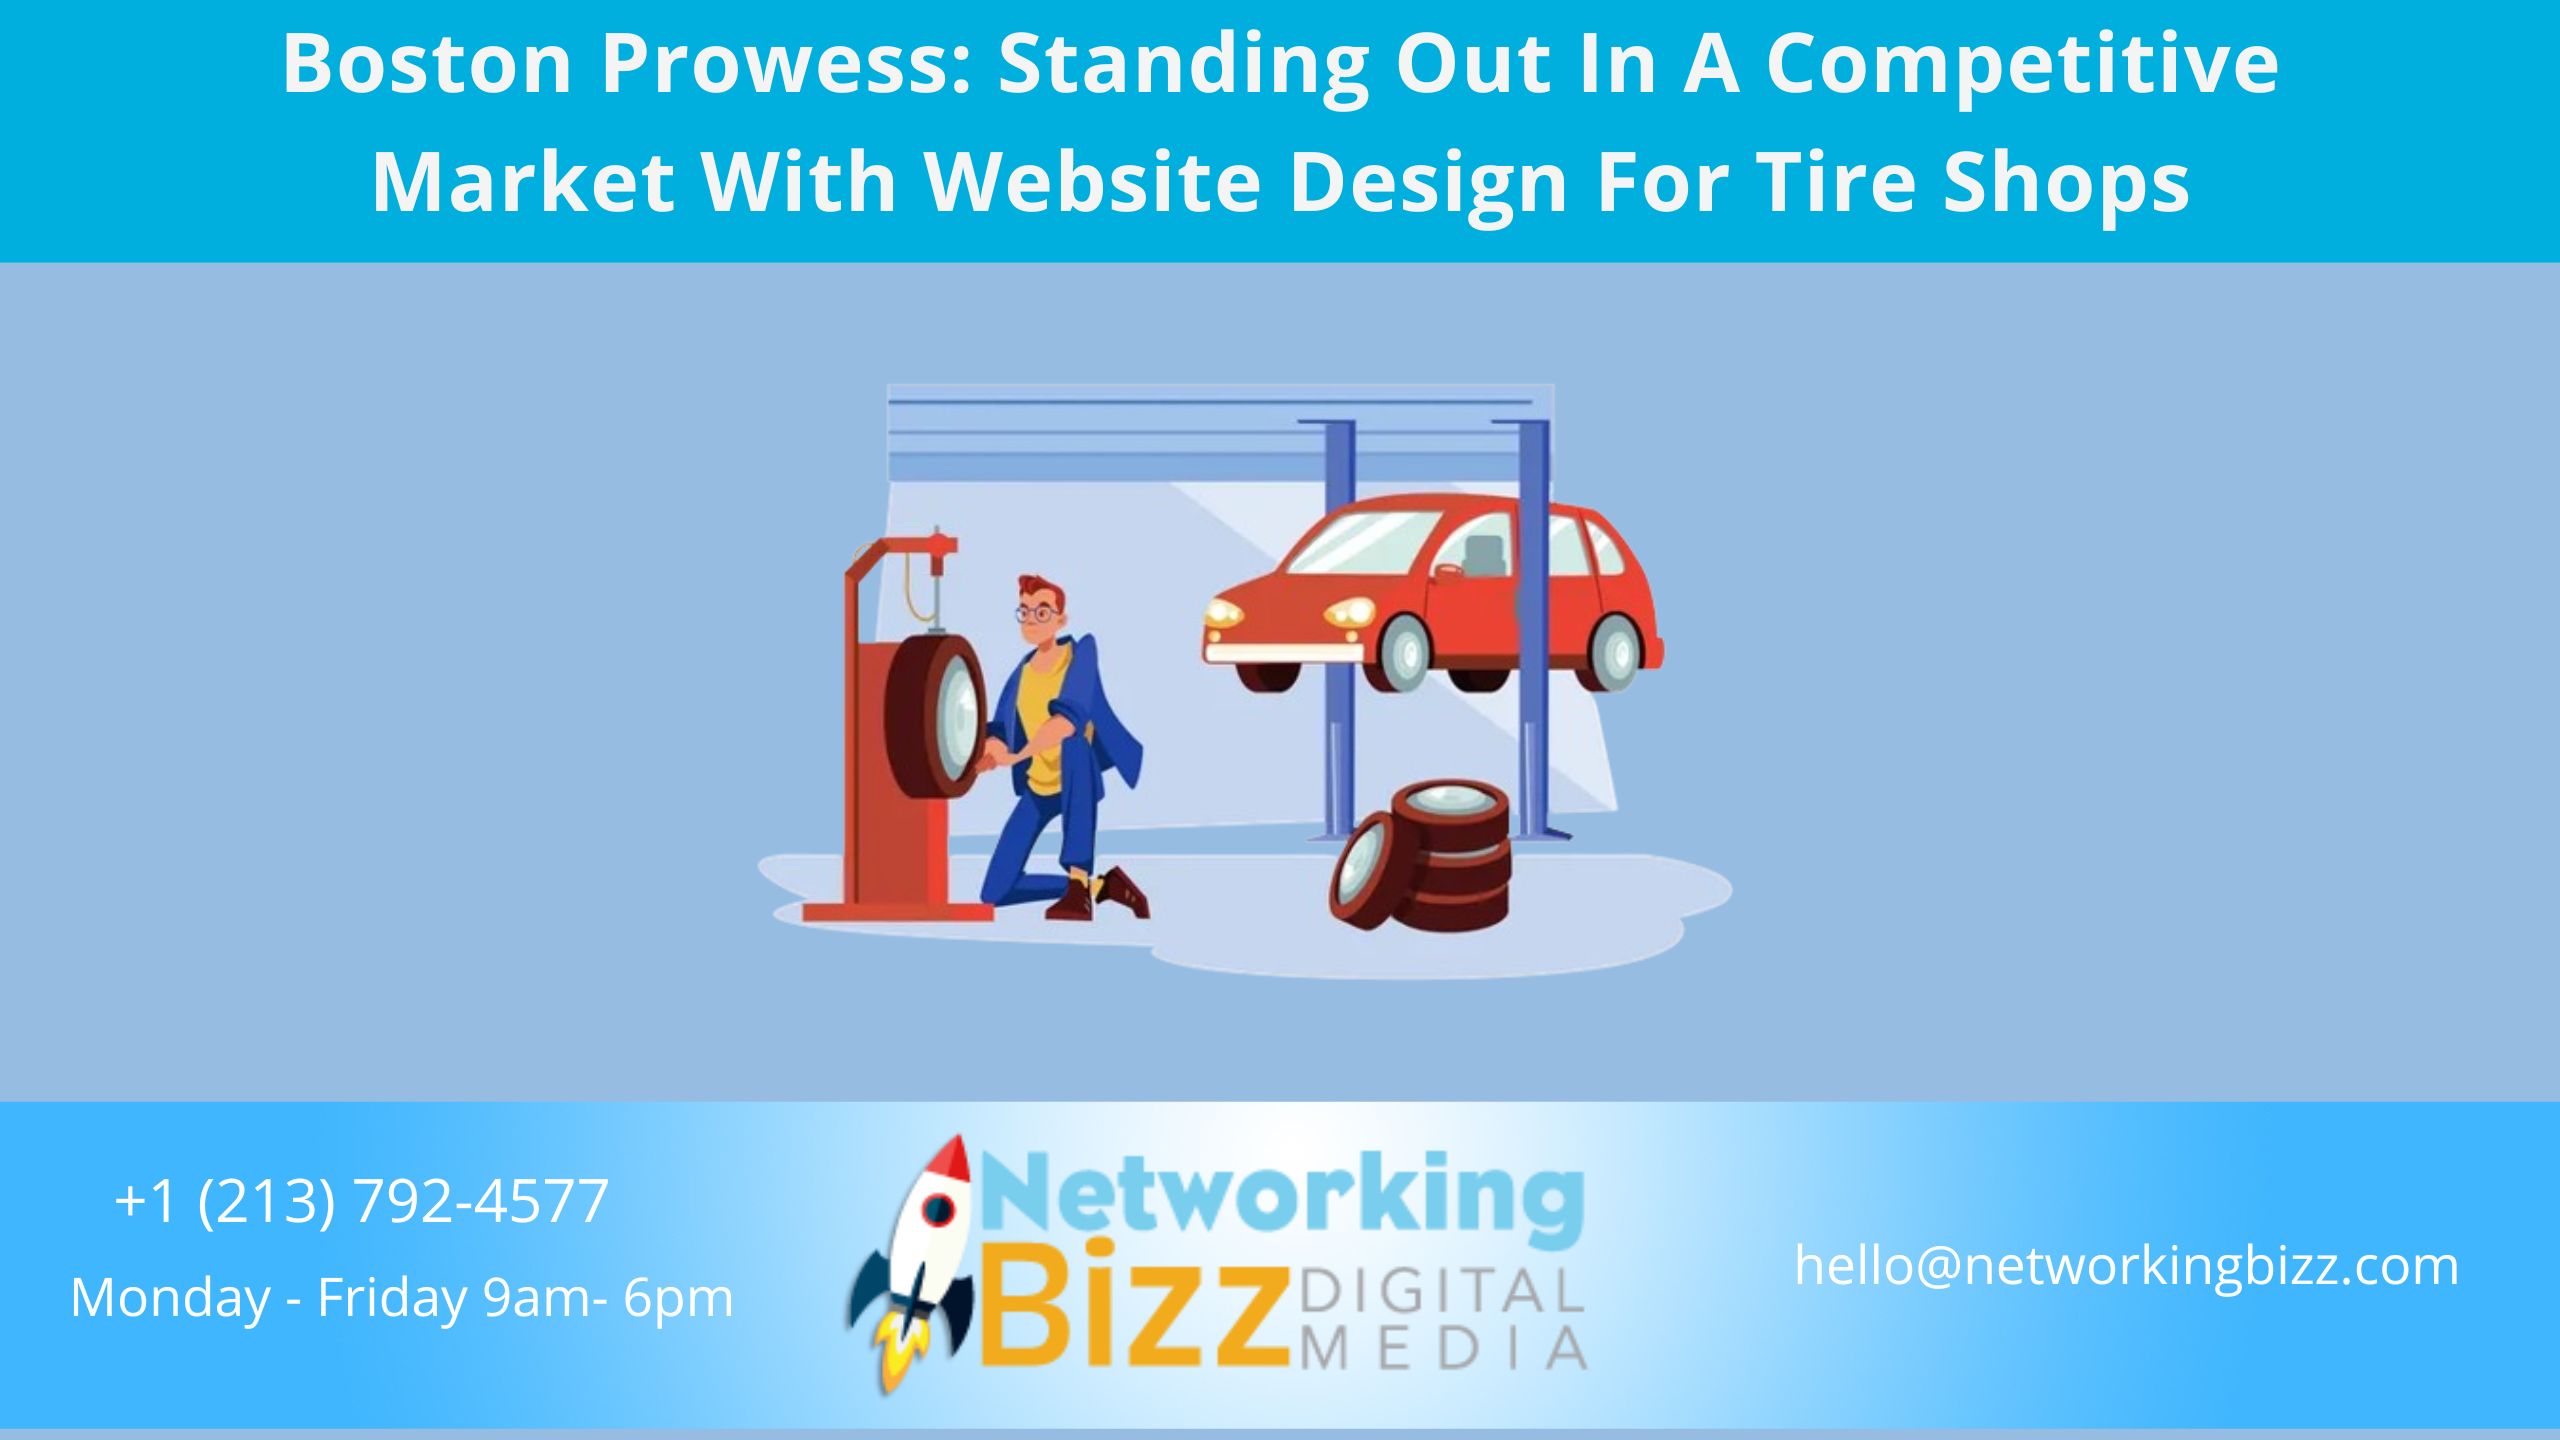 Boston Prowess: Standing Out In A Competitive Market With Website Design For Tire Shops